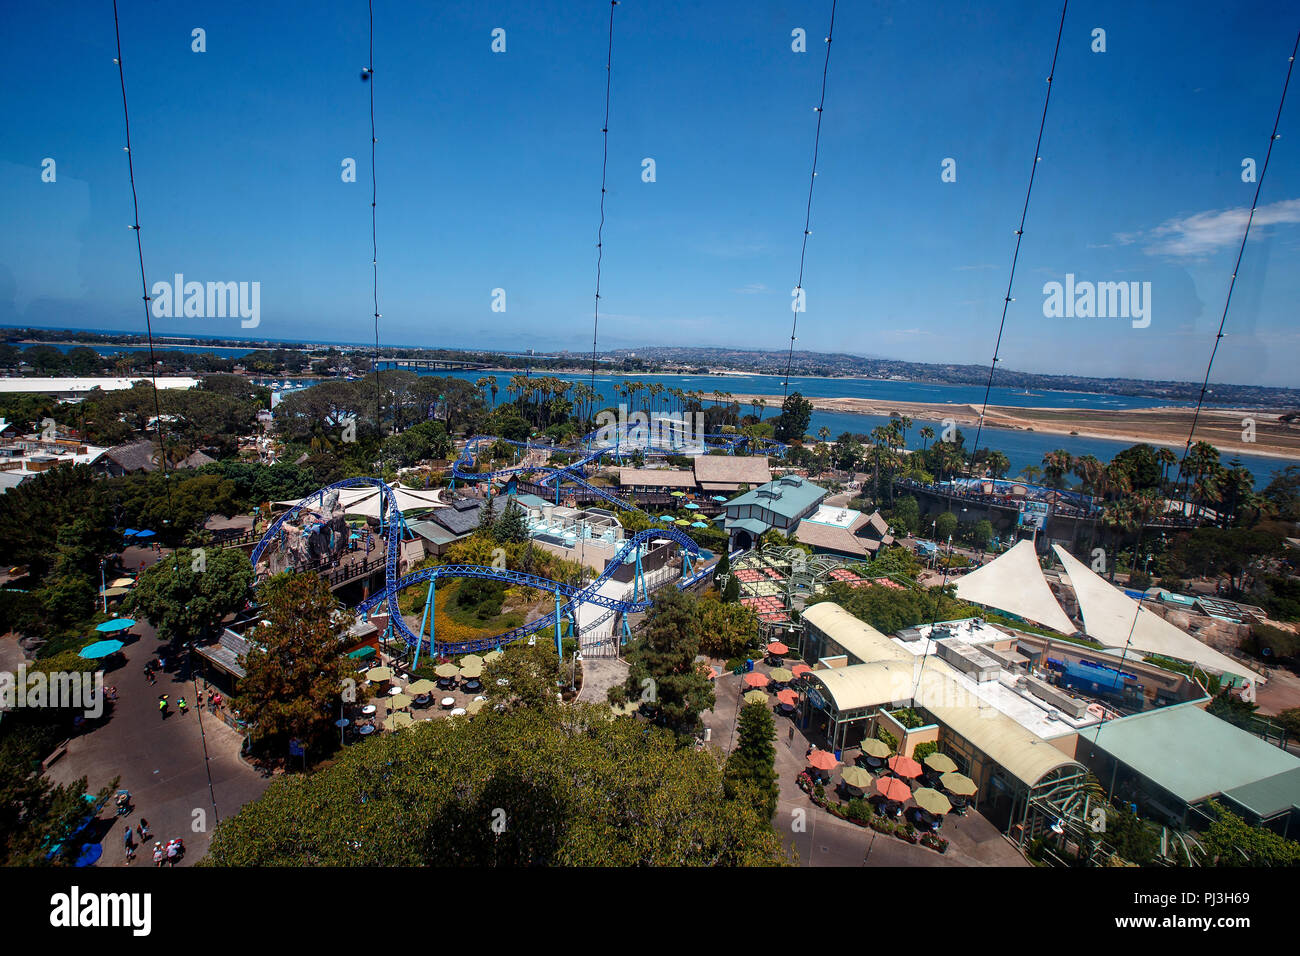 Aerial view of Sea World, San Diego, California, United States of America Stock Photo